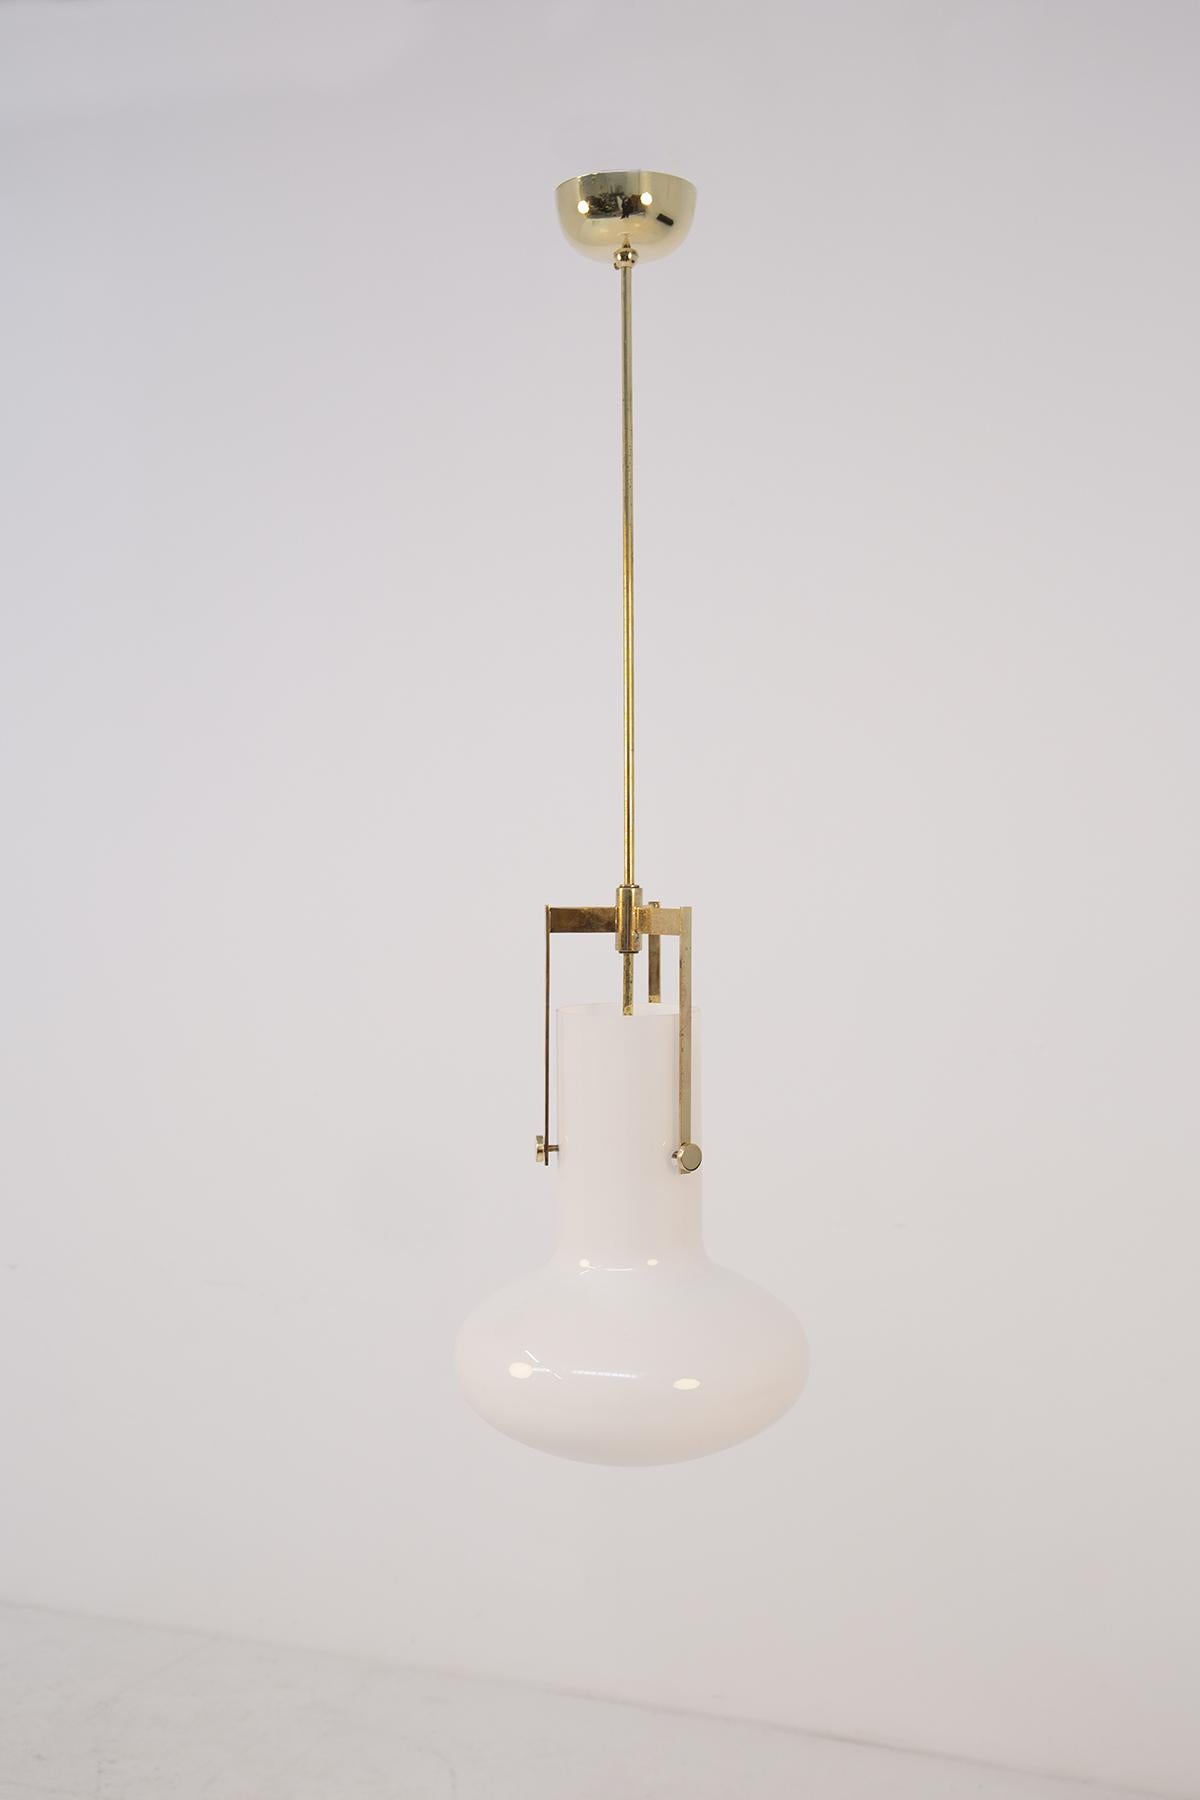 Elegant Italian pendant designed by Ignazio Gardella for Azucena in the 1960s. The wonderful pendant is made of brass with three lateral structures that support the white Opaline glass cap. The Opaline glass is supported by three brass screws that